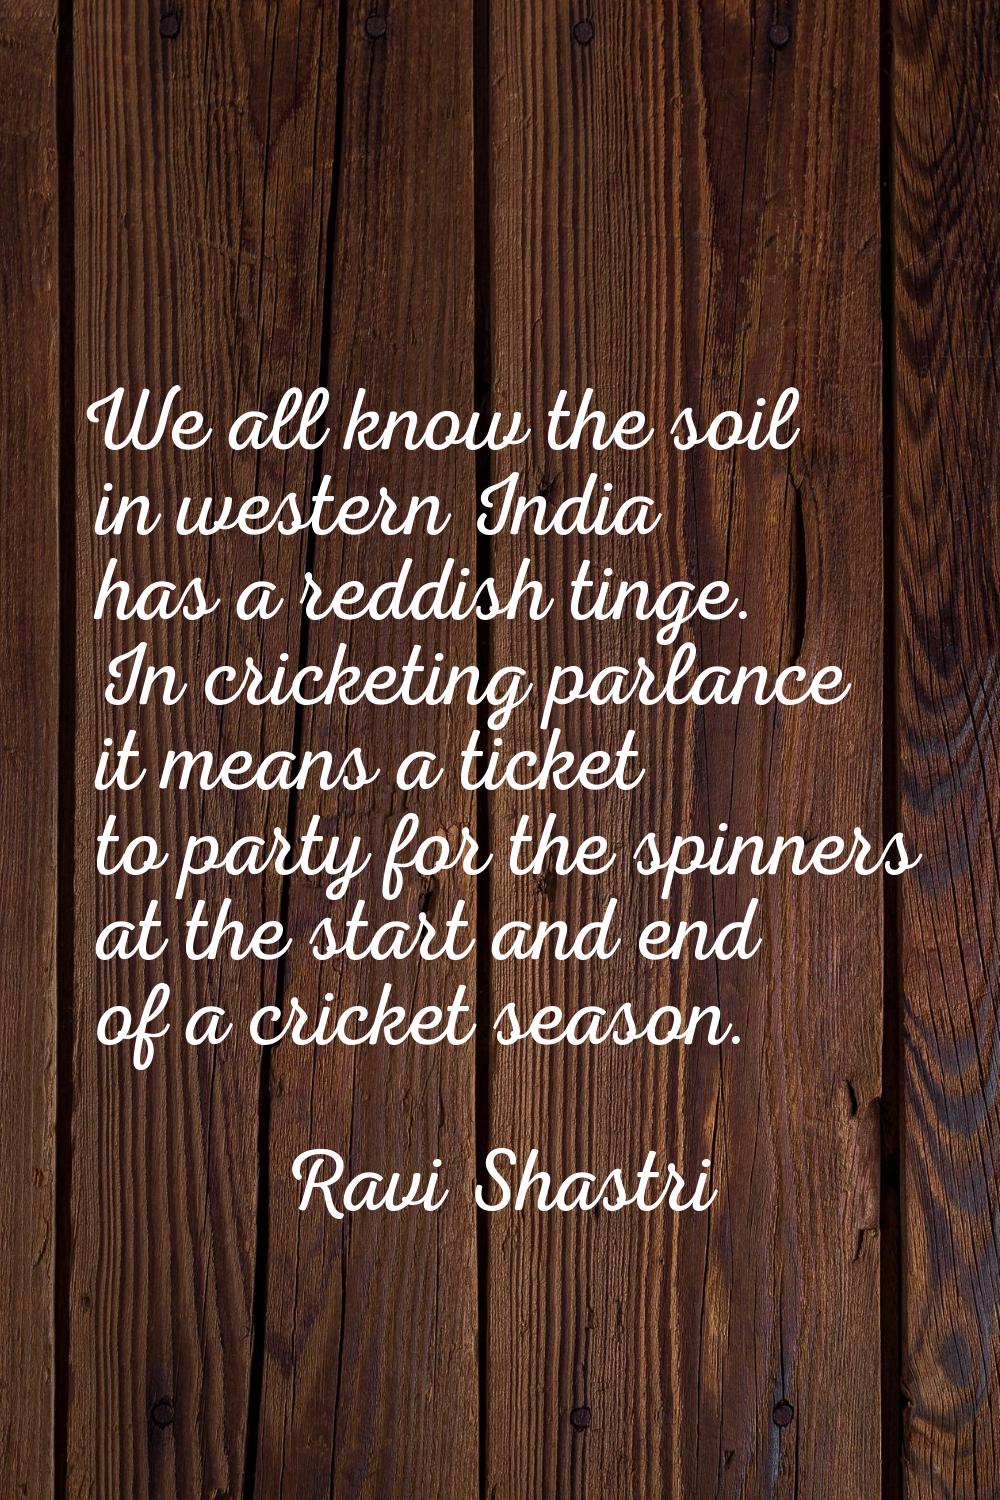 We all know the soil in western India has a reddish tinge. In cricketing parlance it means a ticket